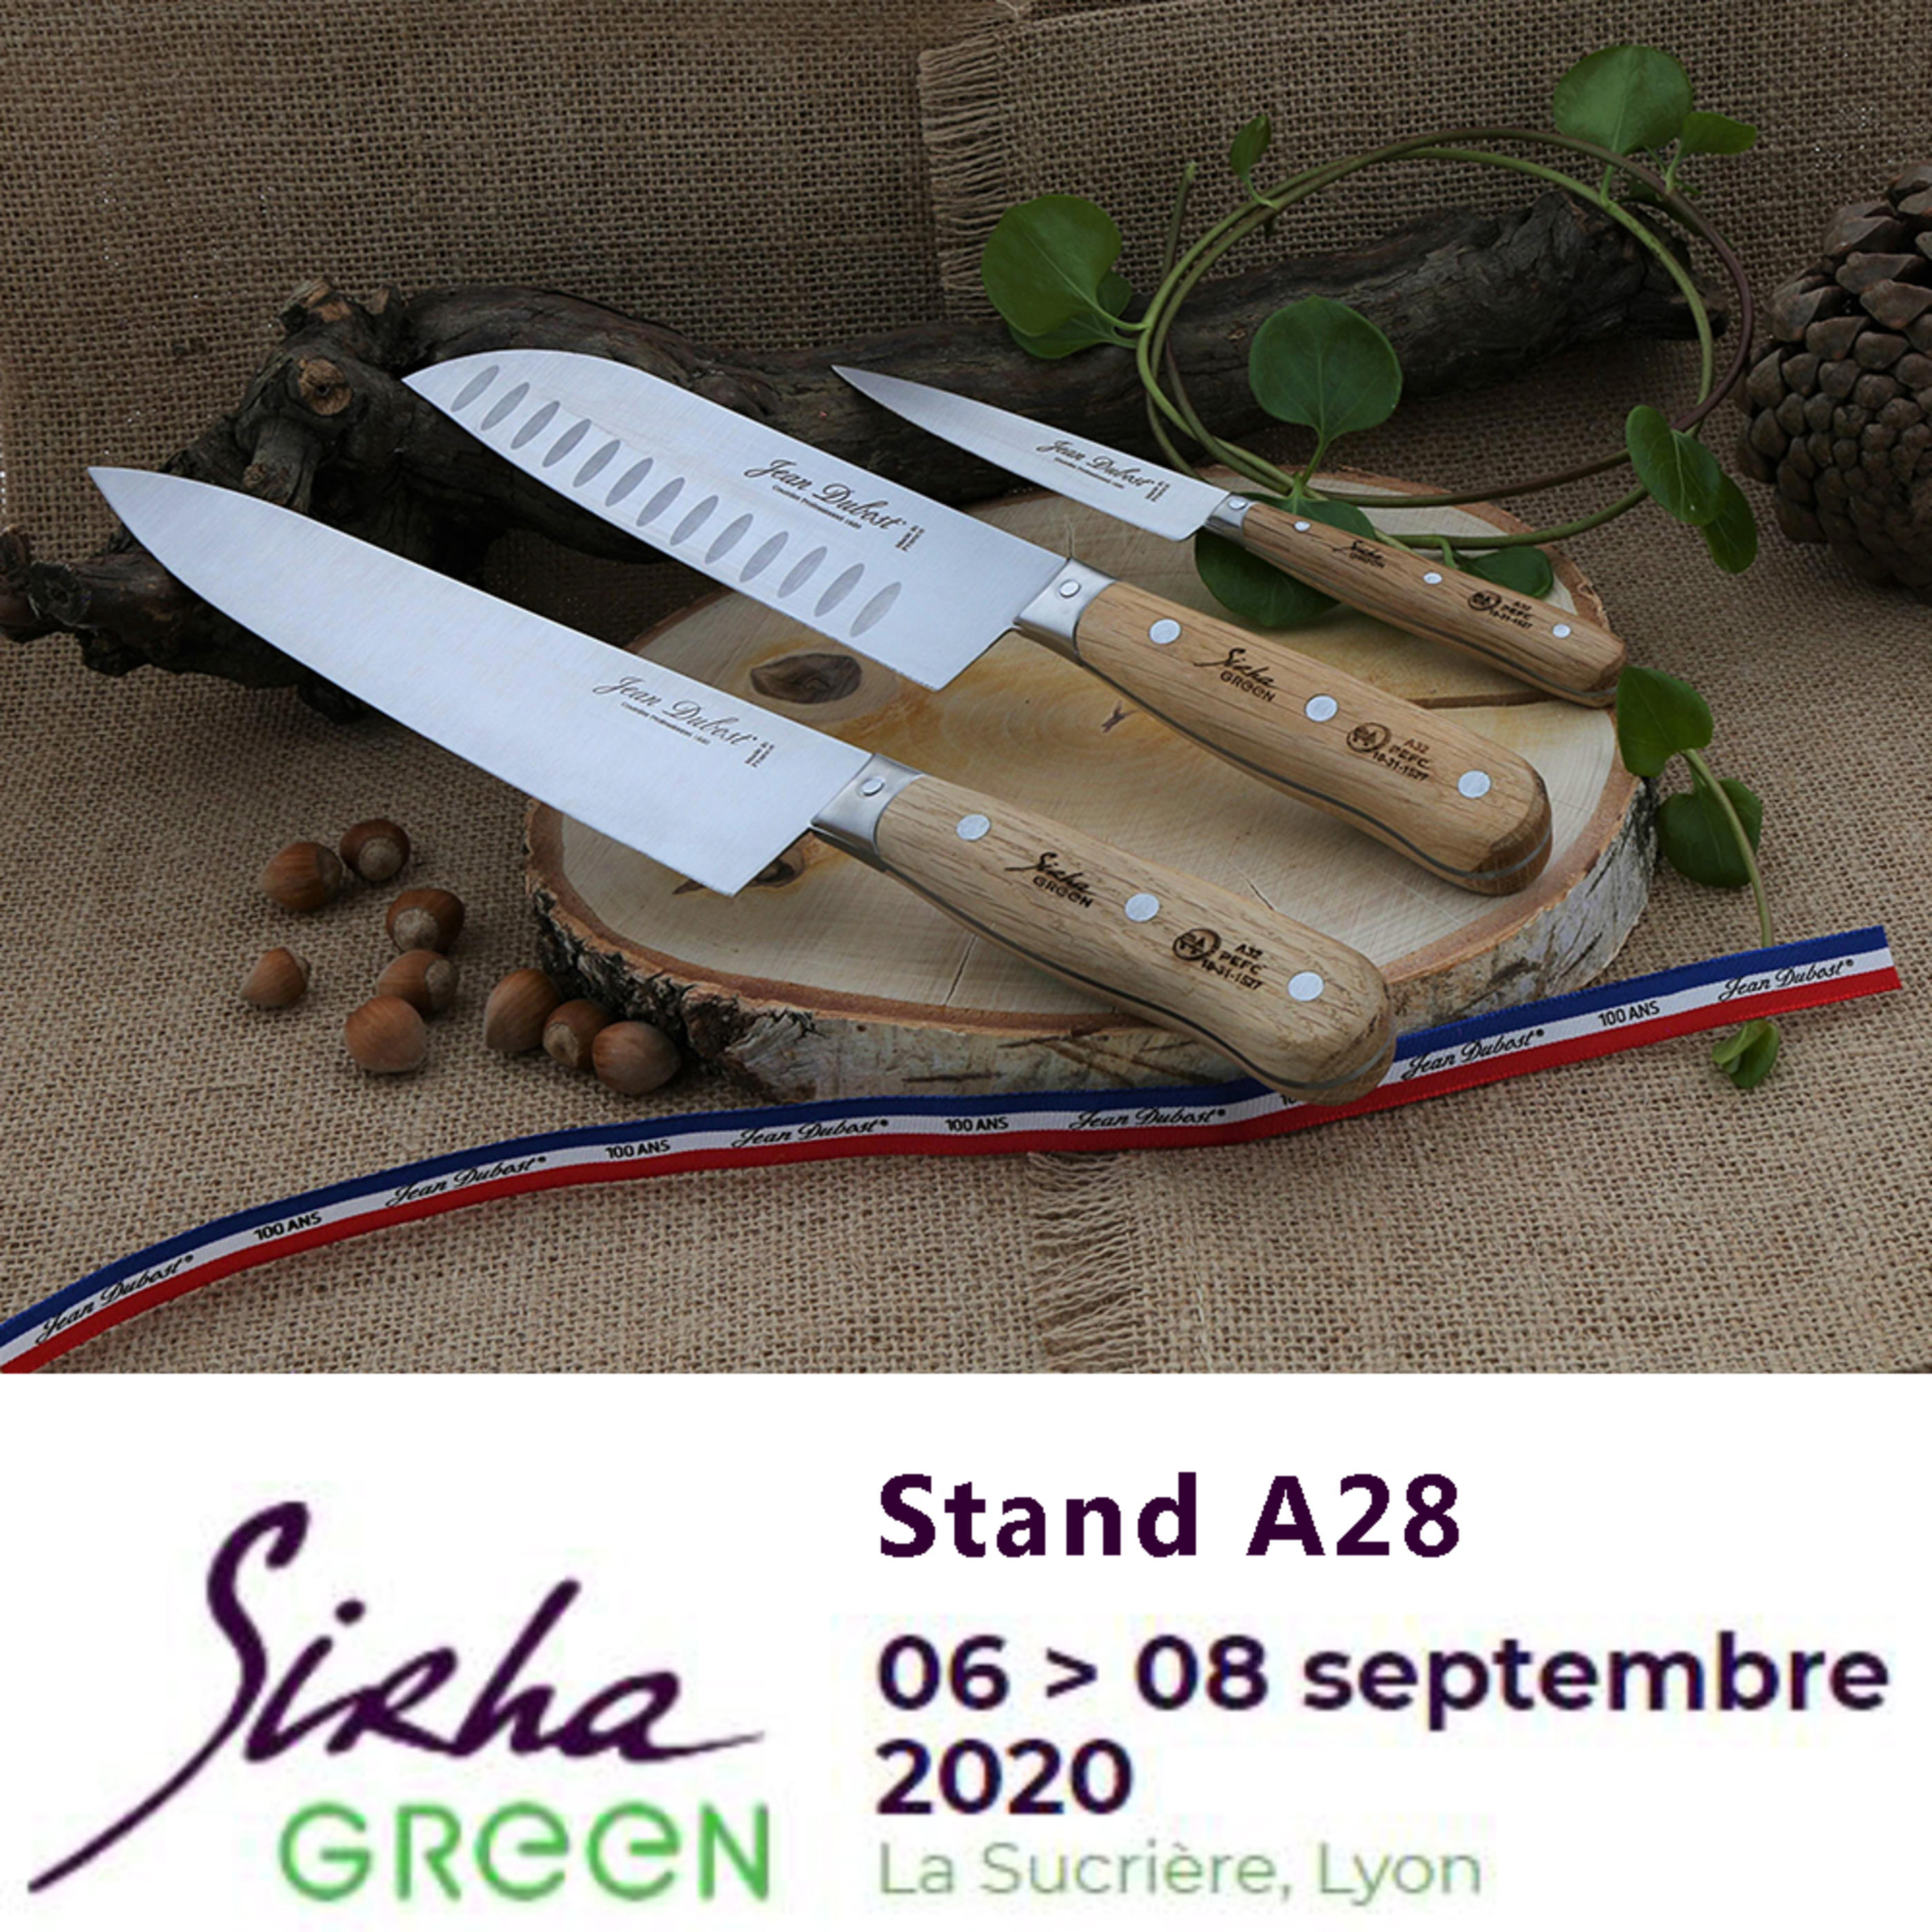 Jean_Dubost_Sirha_green_septembre_2020_stand_A28